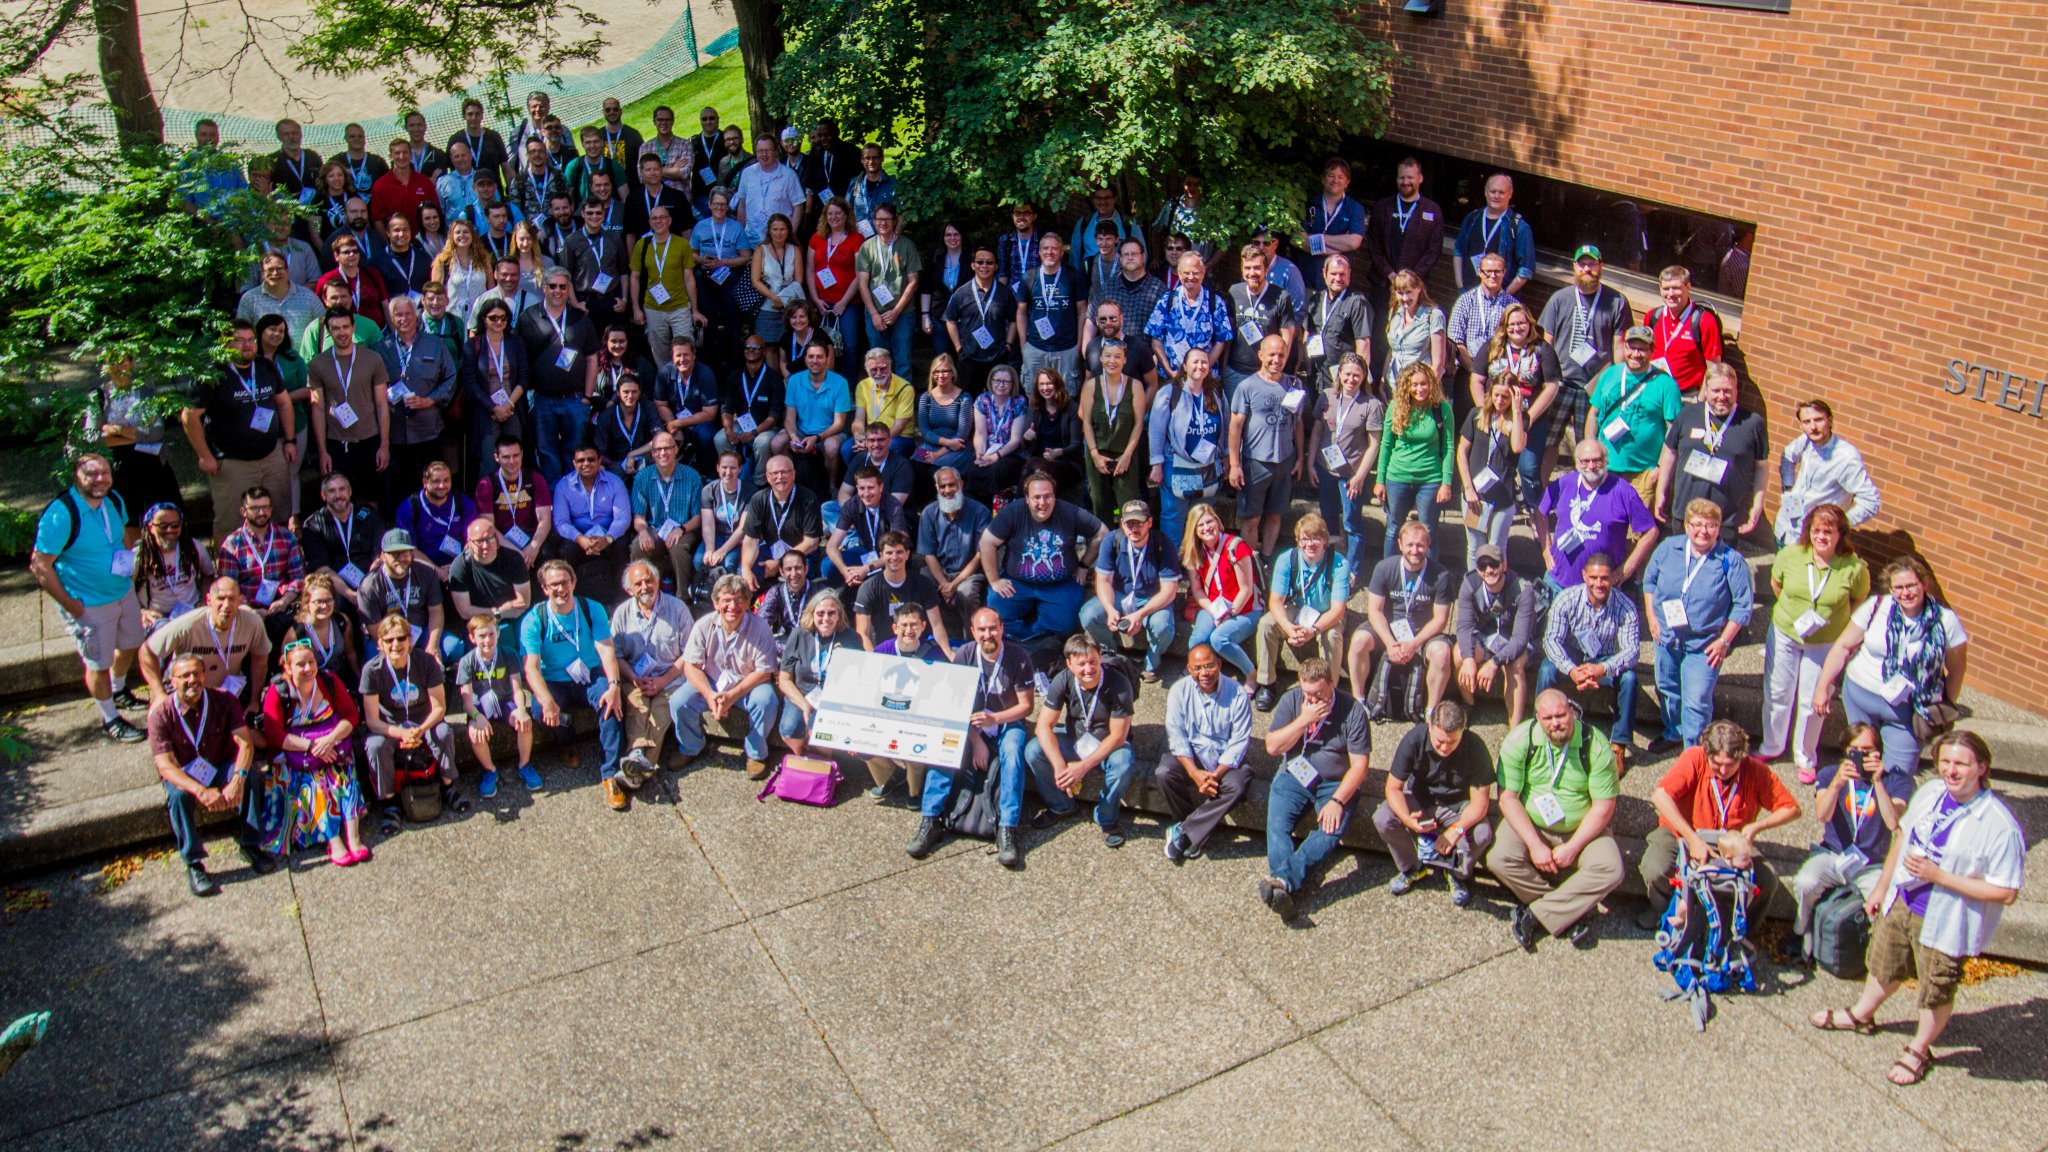 Group photo of attendees from 2016 Twin Cities Drupal Camp